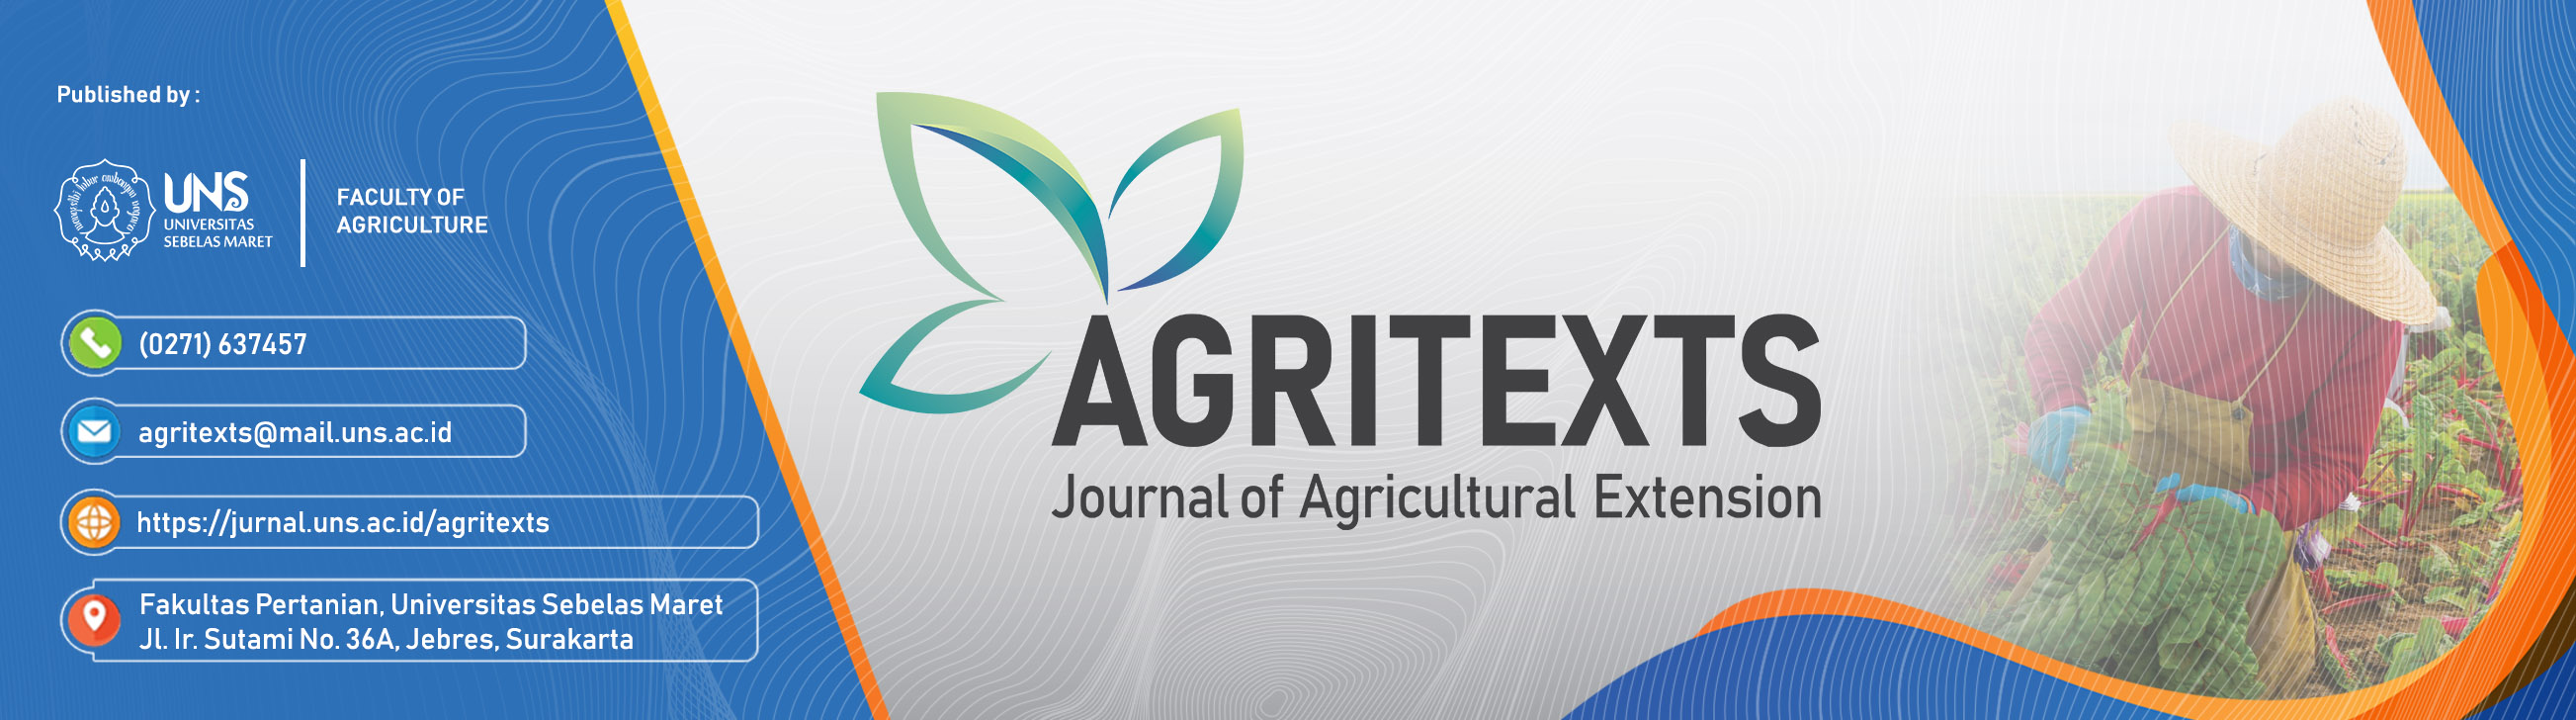 AGRITEXTS: Journal of Agricultural Extension